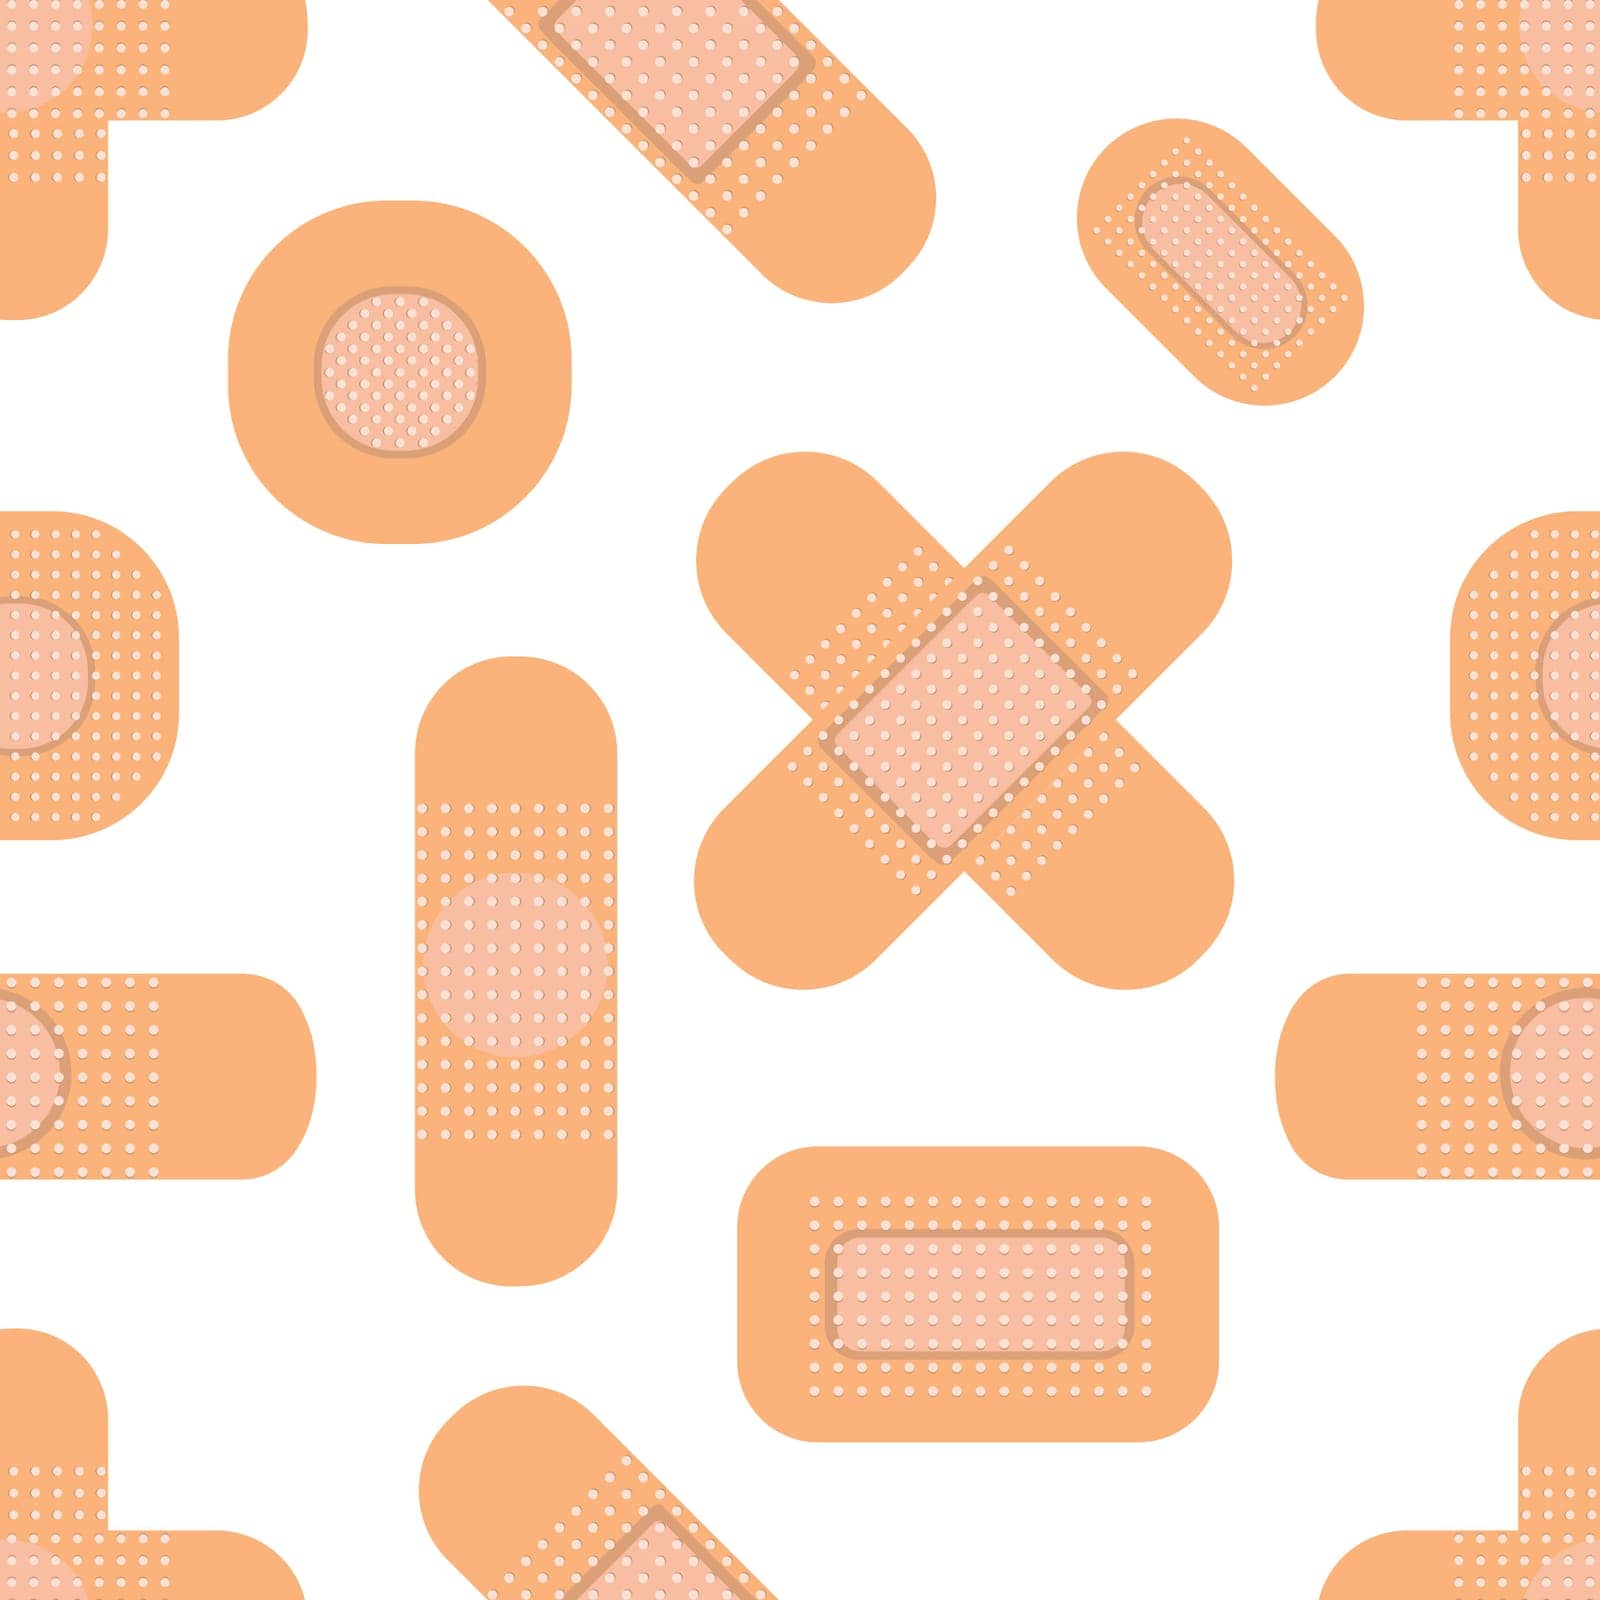 Seamless pattern with medical plasters. Medical patch pattern. Flat vector illustration.